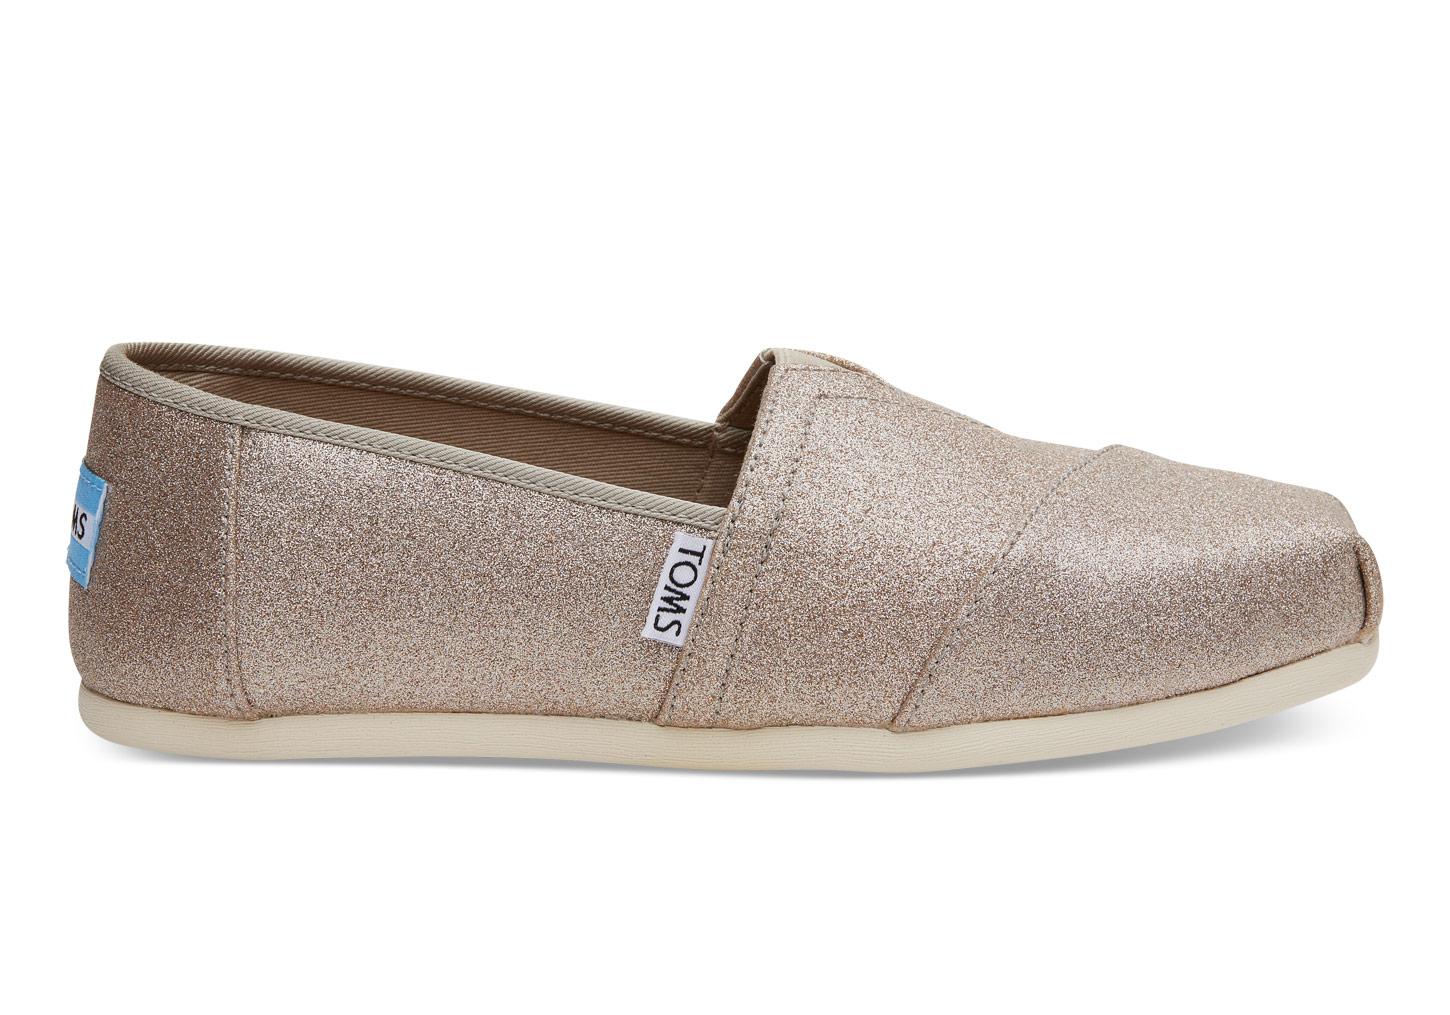 TOMS Rubber Rose Gold Glimmer Women's Classics - Lyst